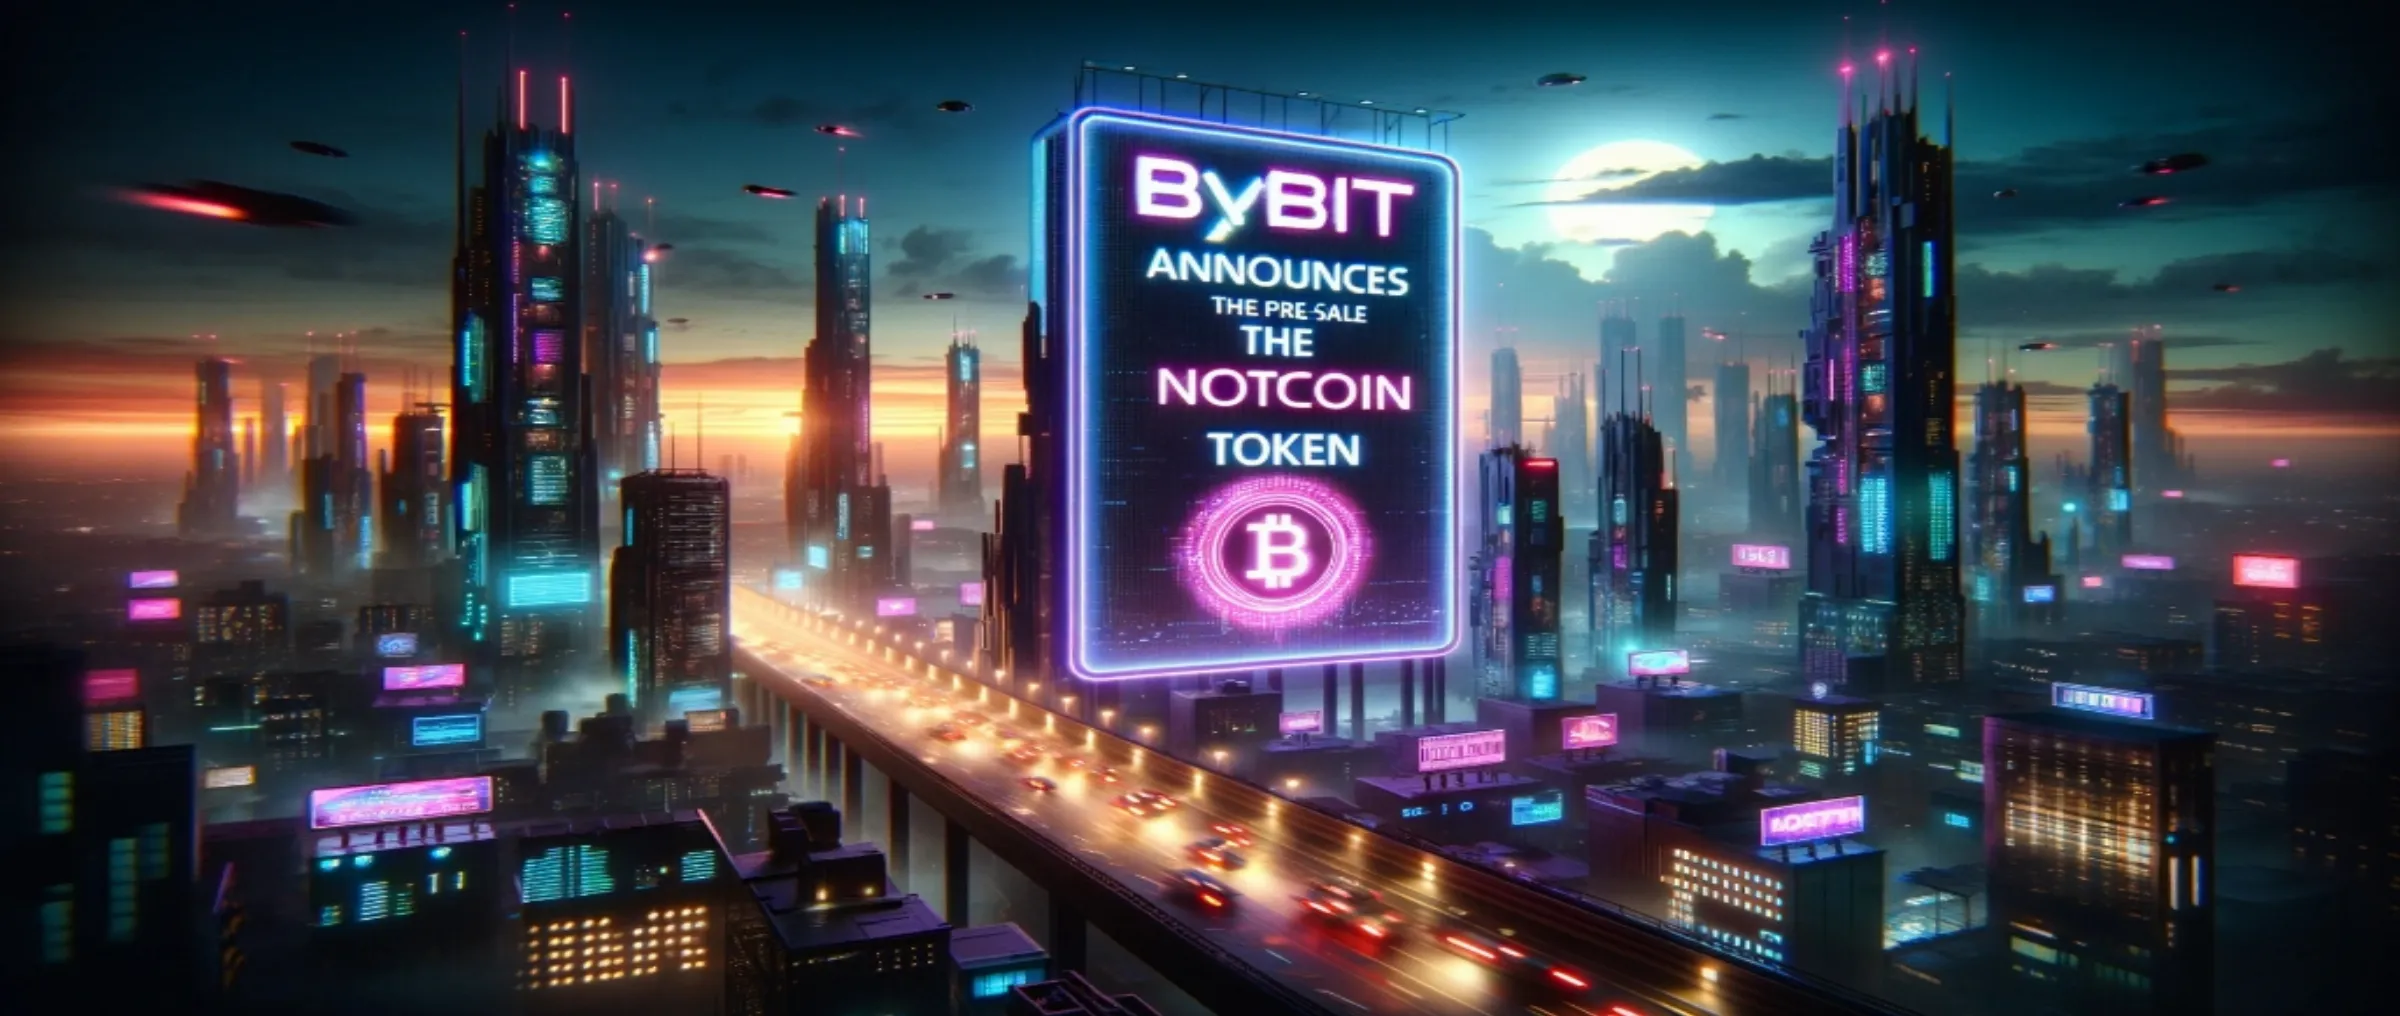 Bybit has started the pre-sale of the Notcoin token